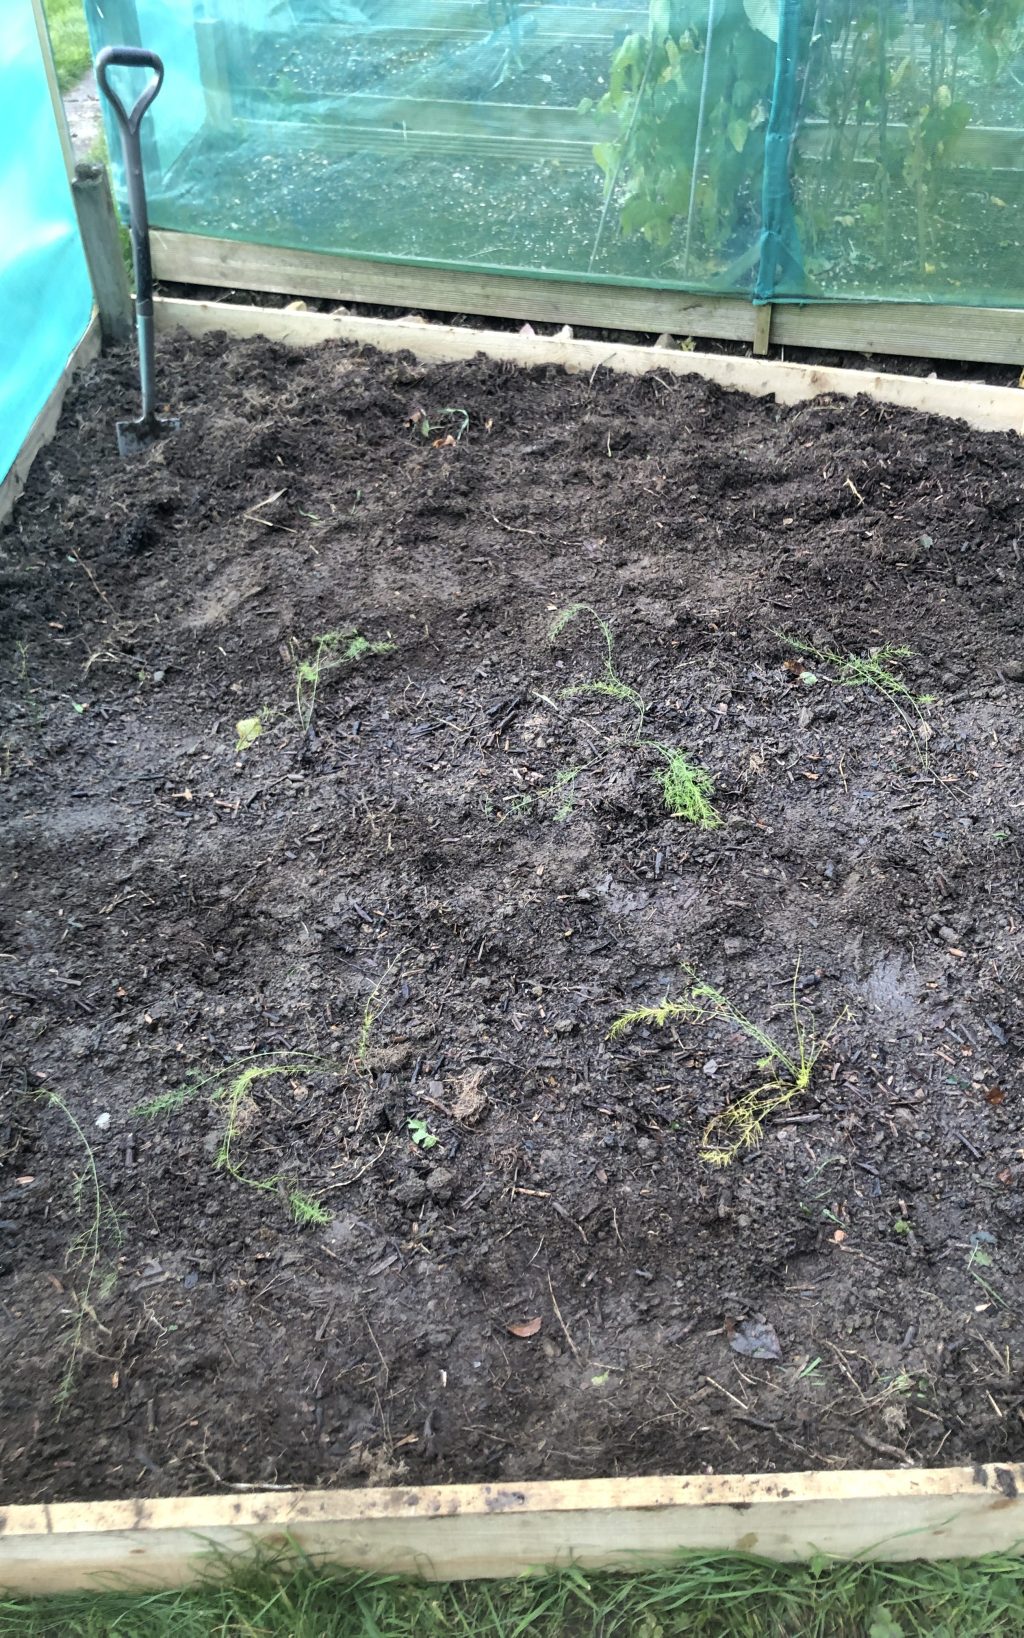 The asparagus bed